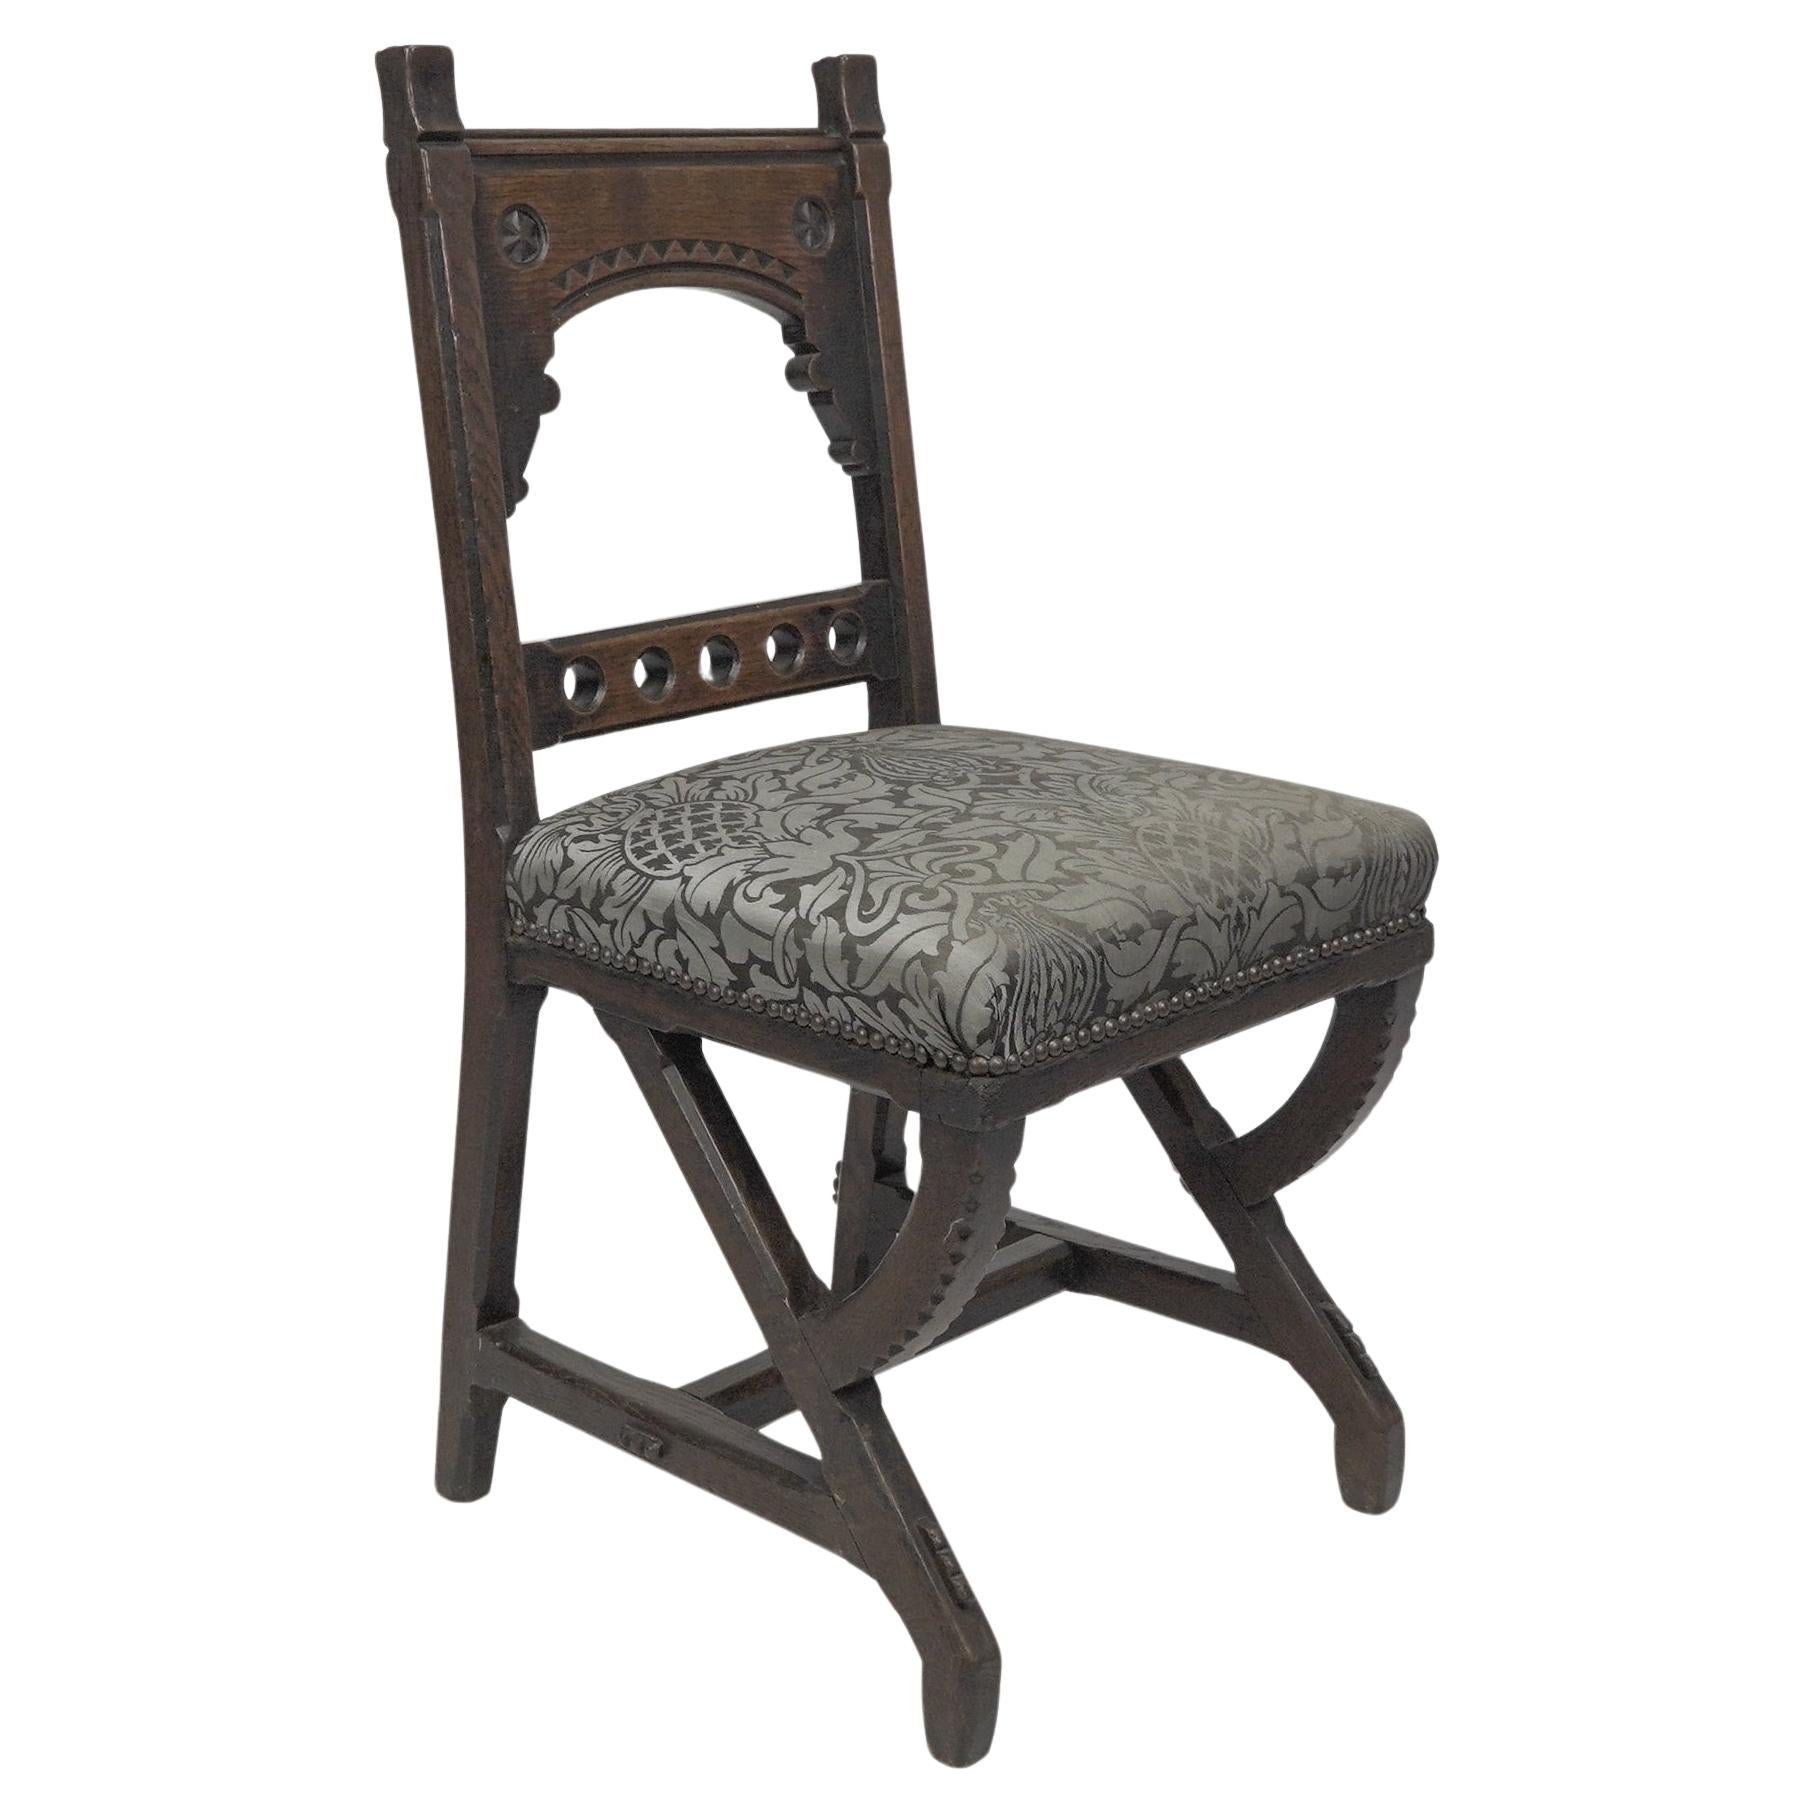 Charles Bevan attributed. A Gothic Revival oak side chair with carved decoration